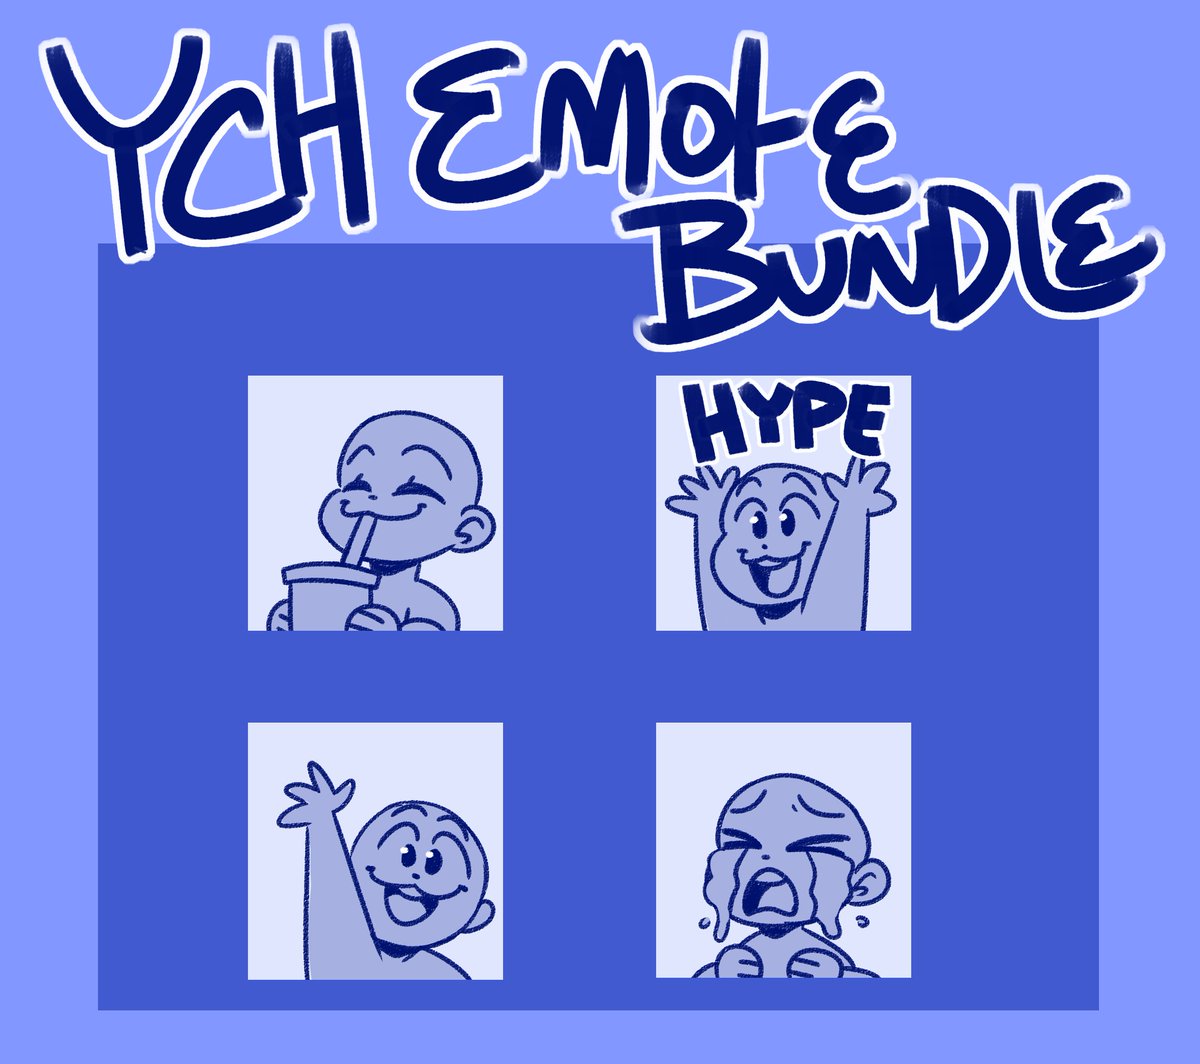 Opening YCH emote slots! DM or comment to claim 💖
$15 for a single
$50 for the bundle
 - - - - 
#emoteartist #twitchemoteartist #emotecommissions